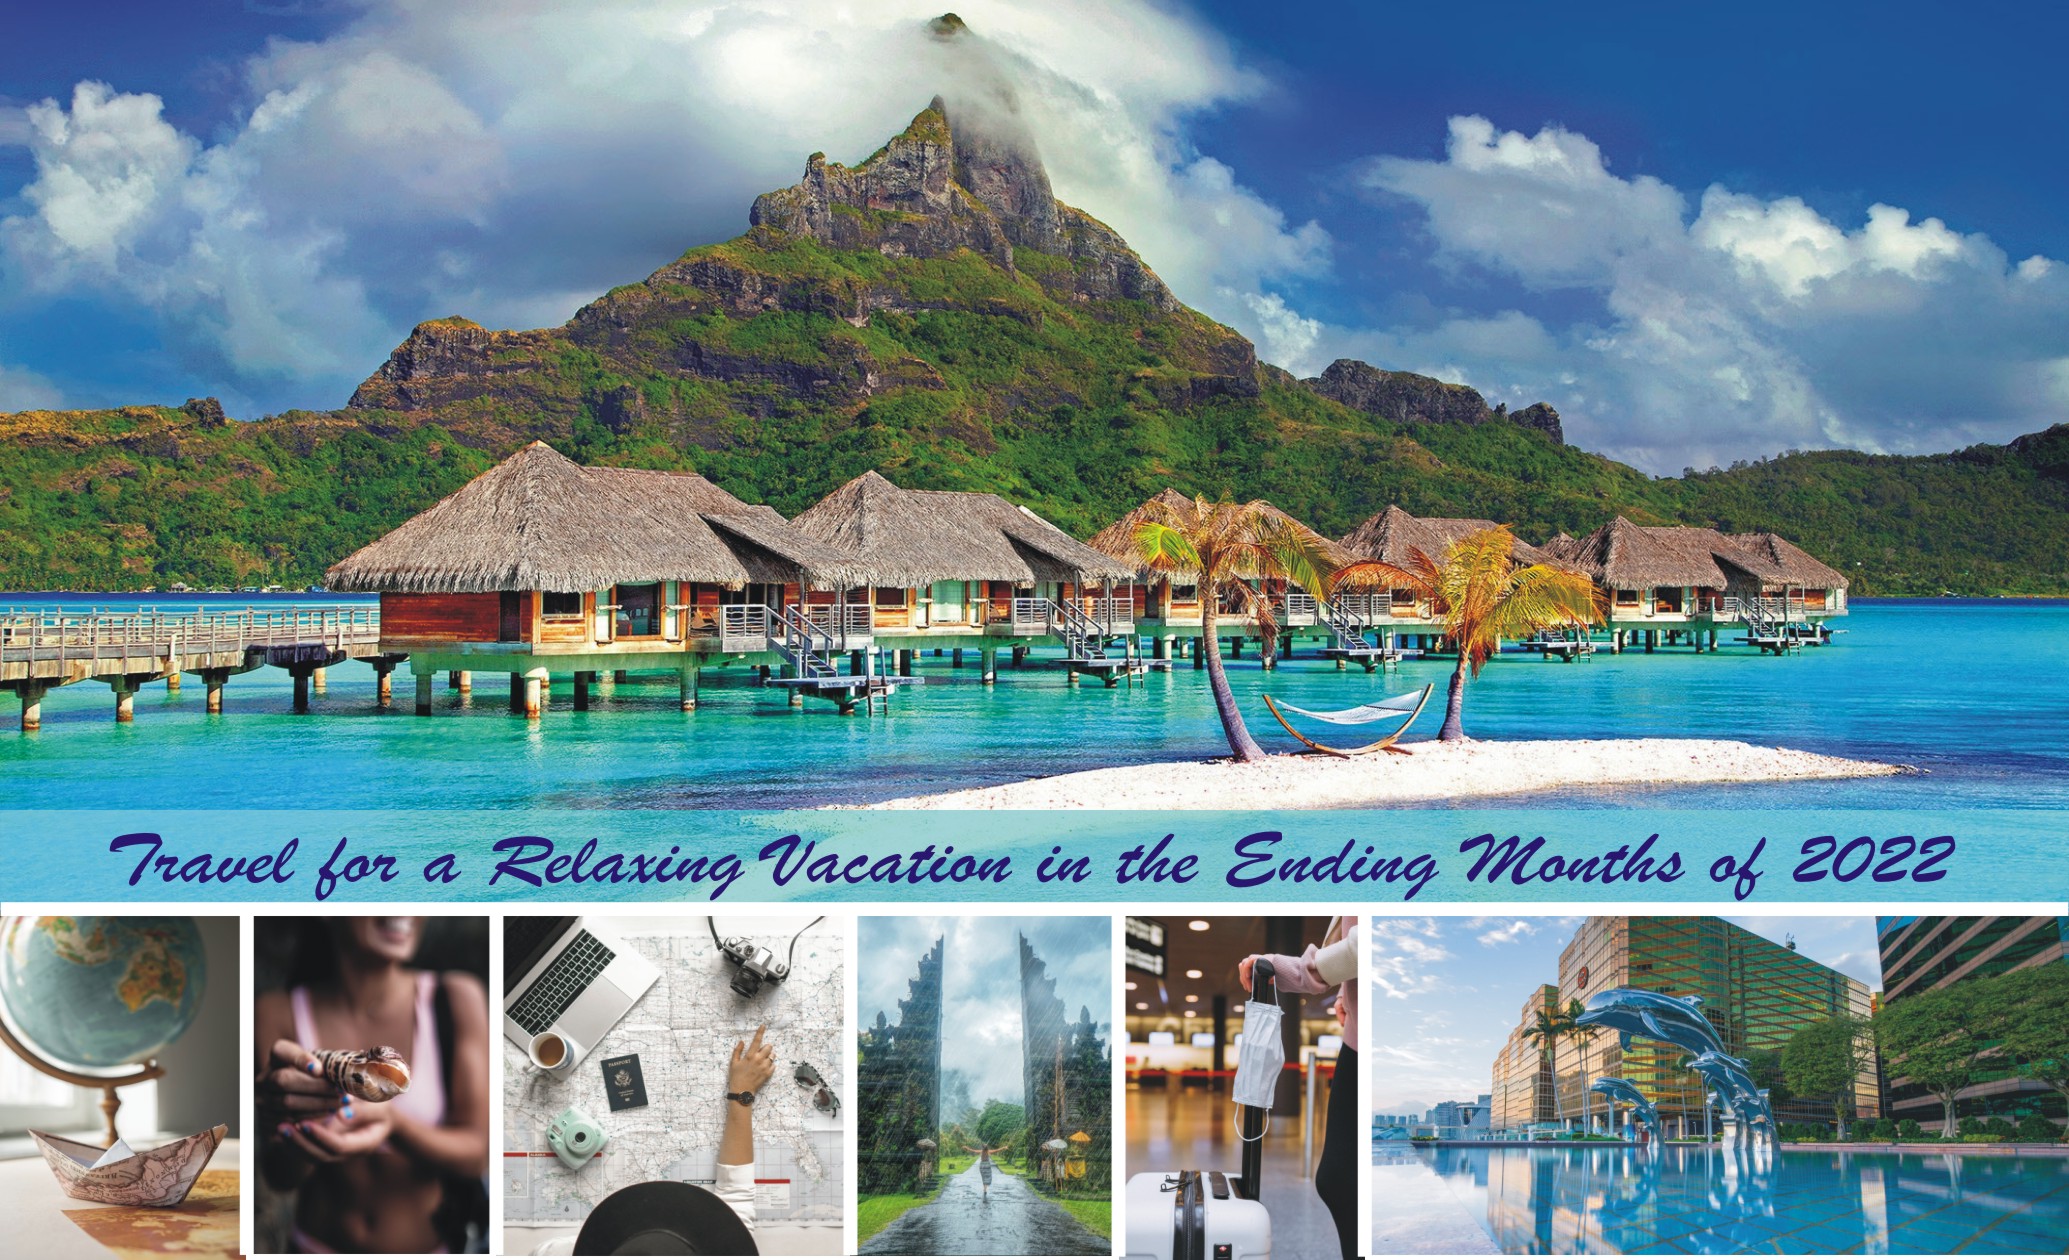 Travel for a Relaxing Vacation in the Ending Months of 9